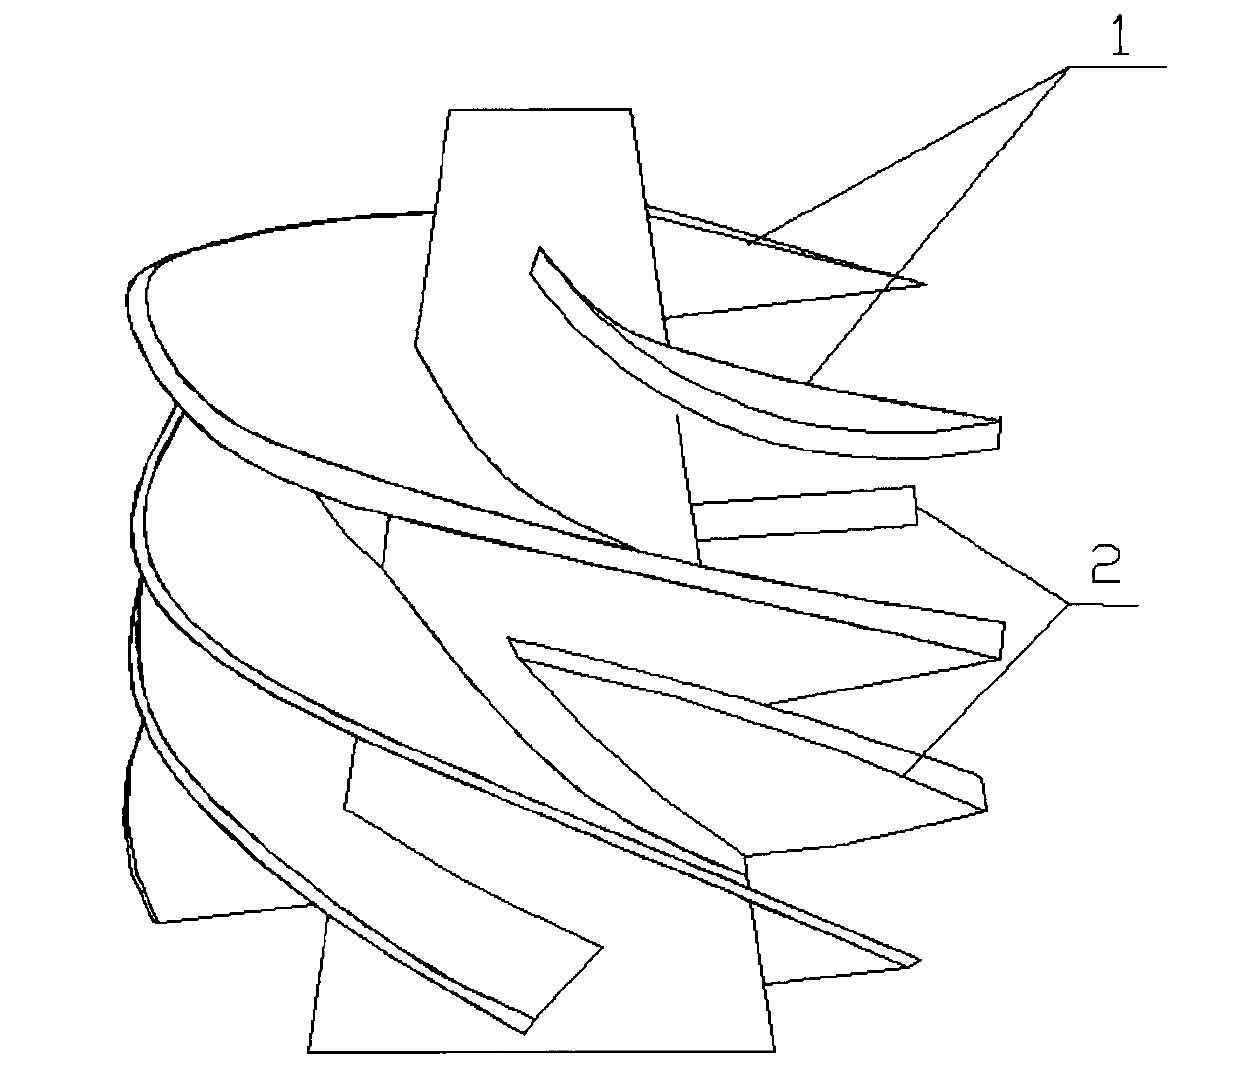 Pitch-varying design method of inducer with long and short blades